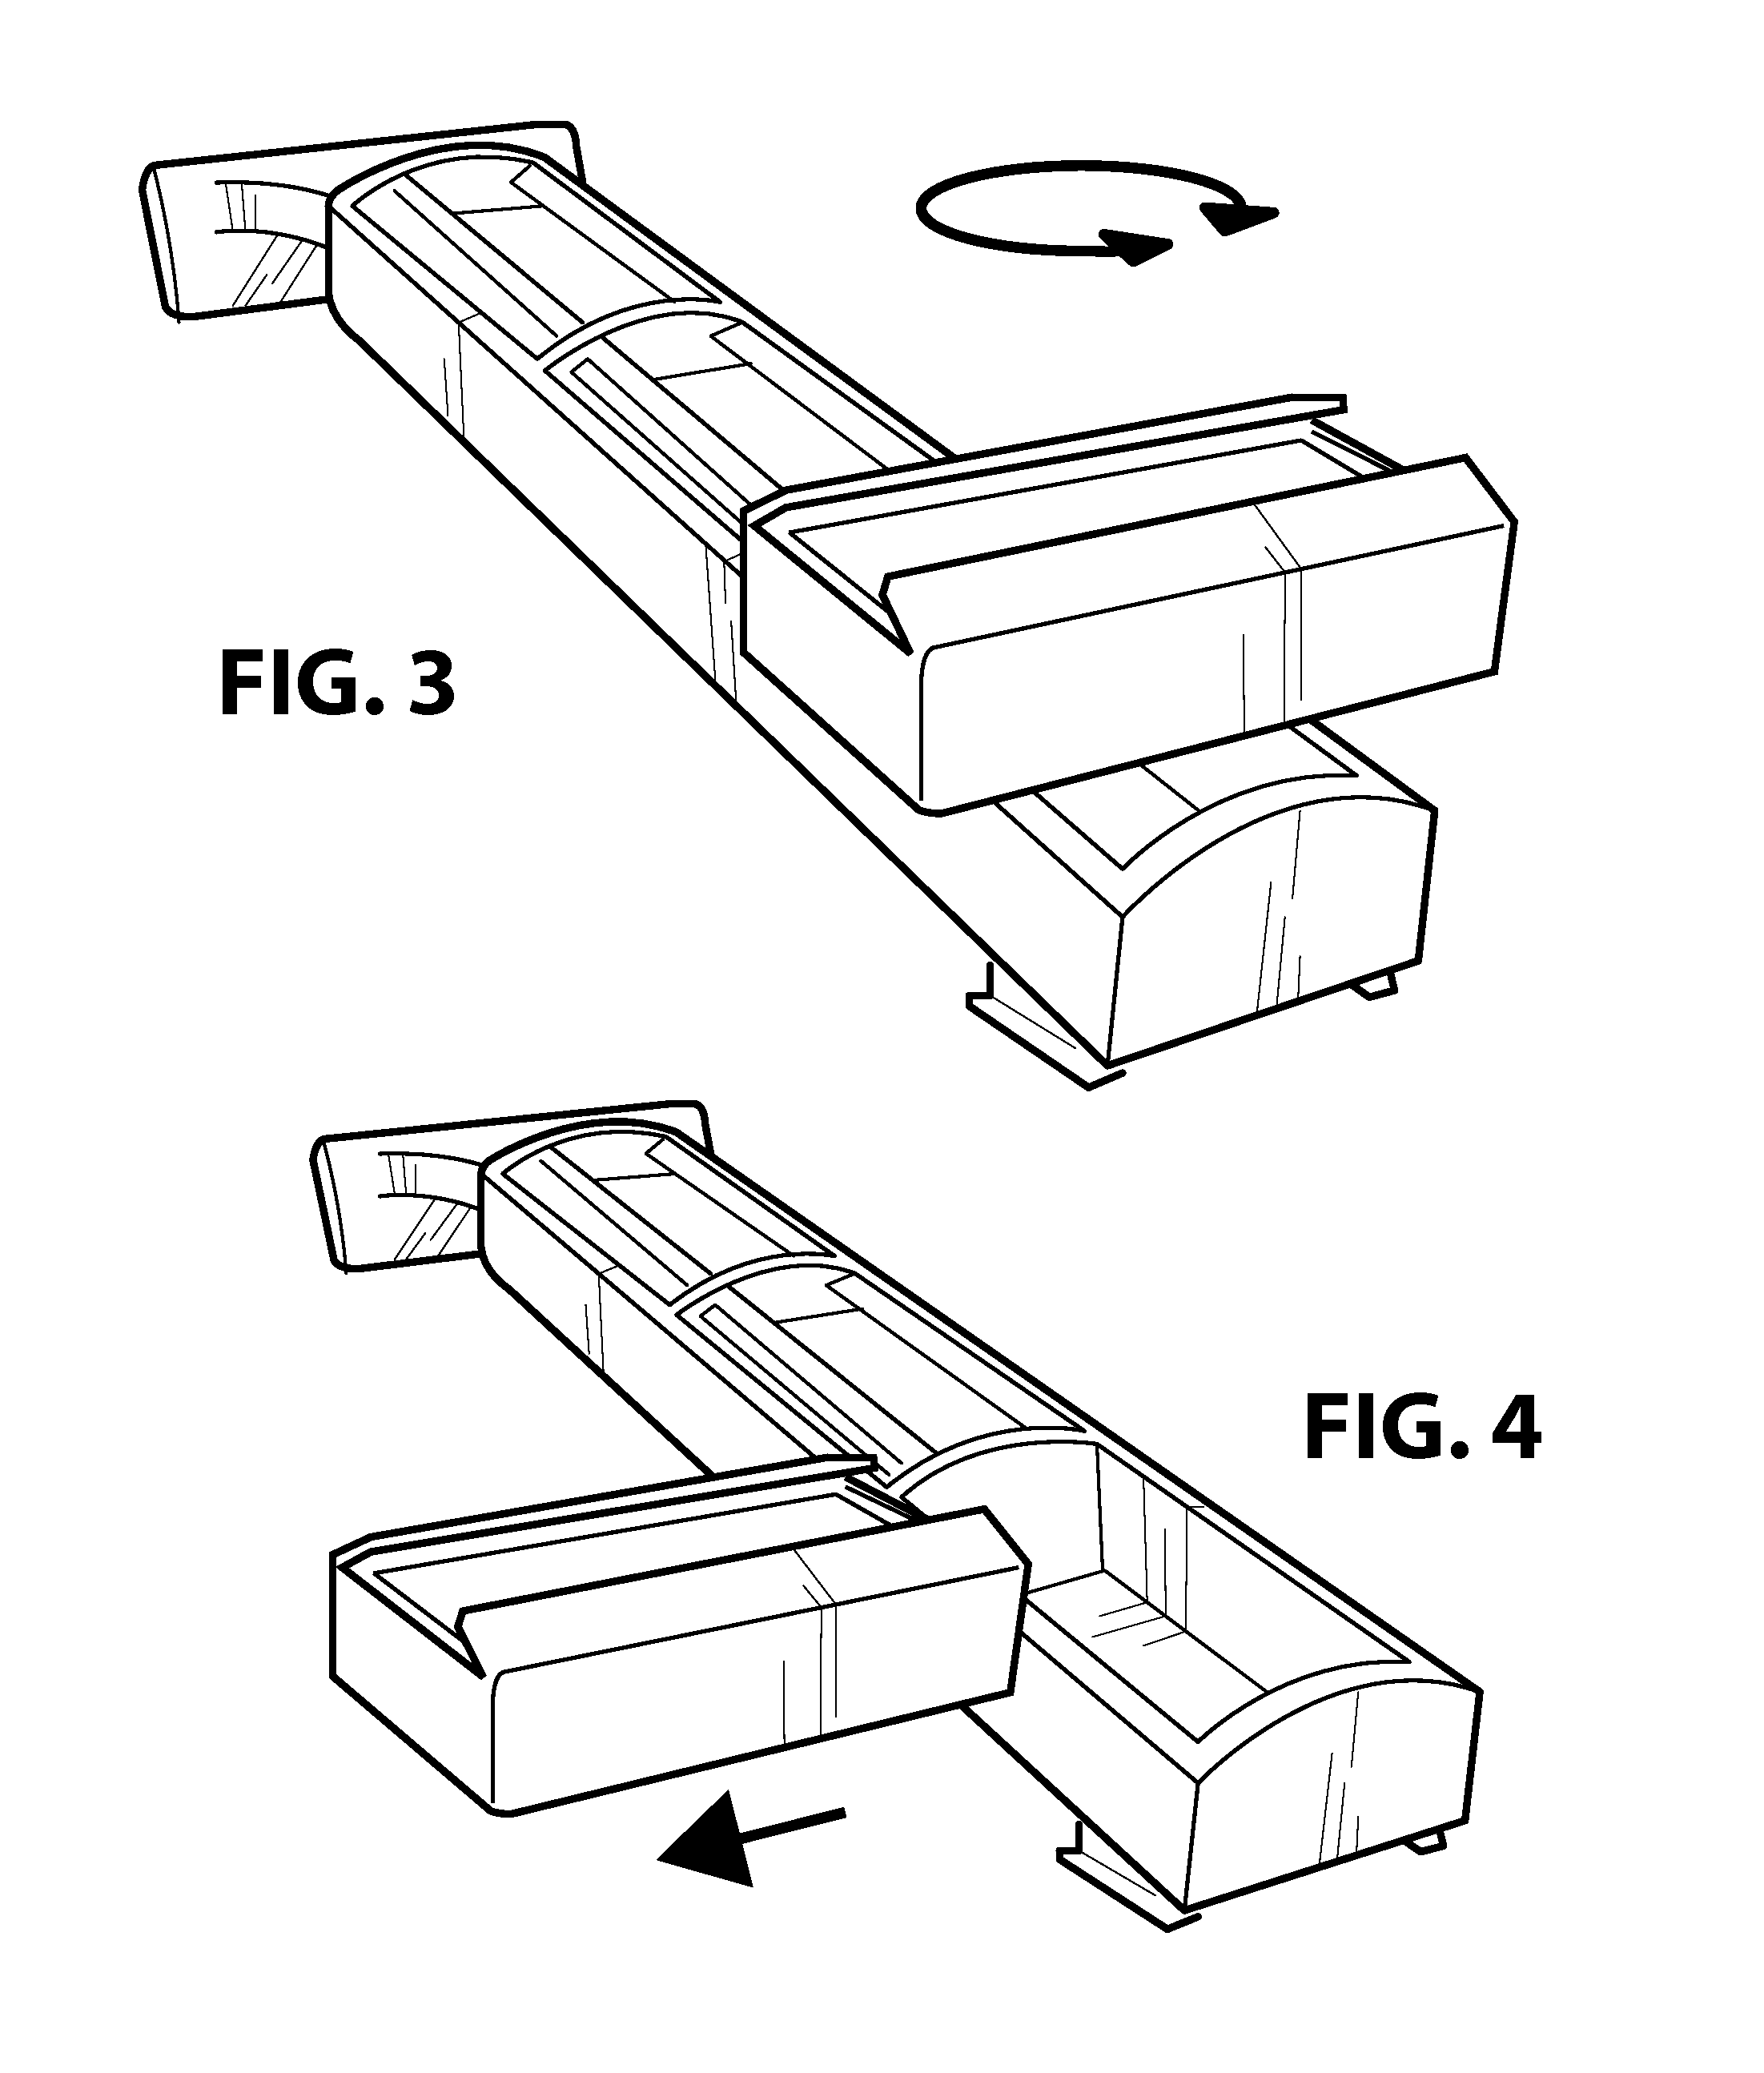 Skin Care And Shaving Cartridge System